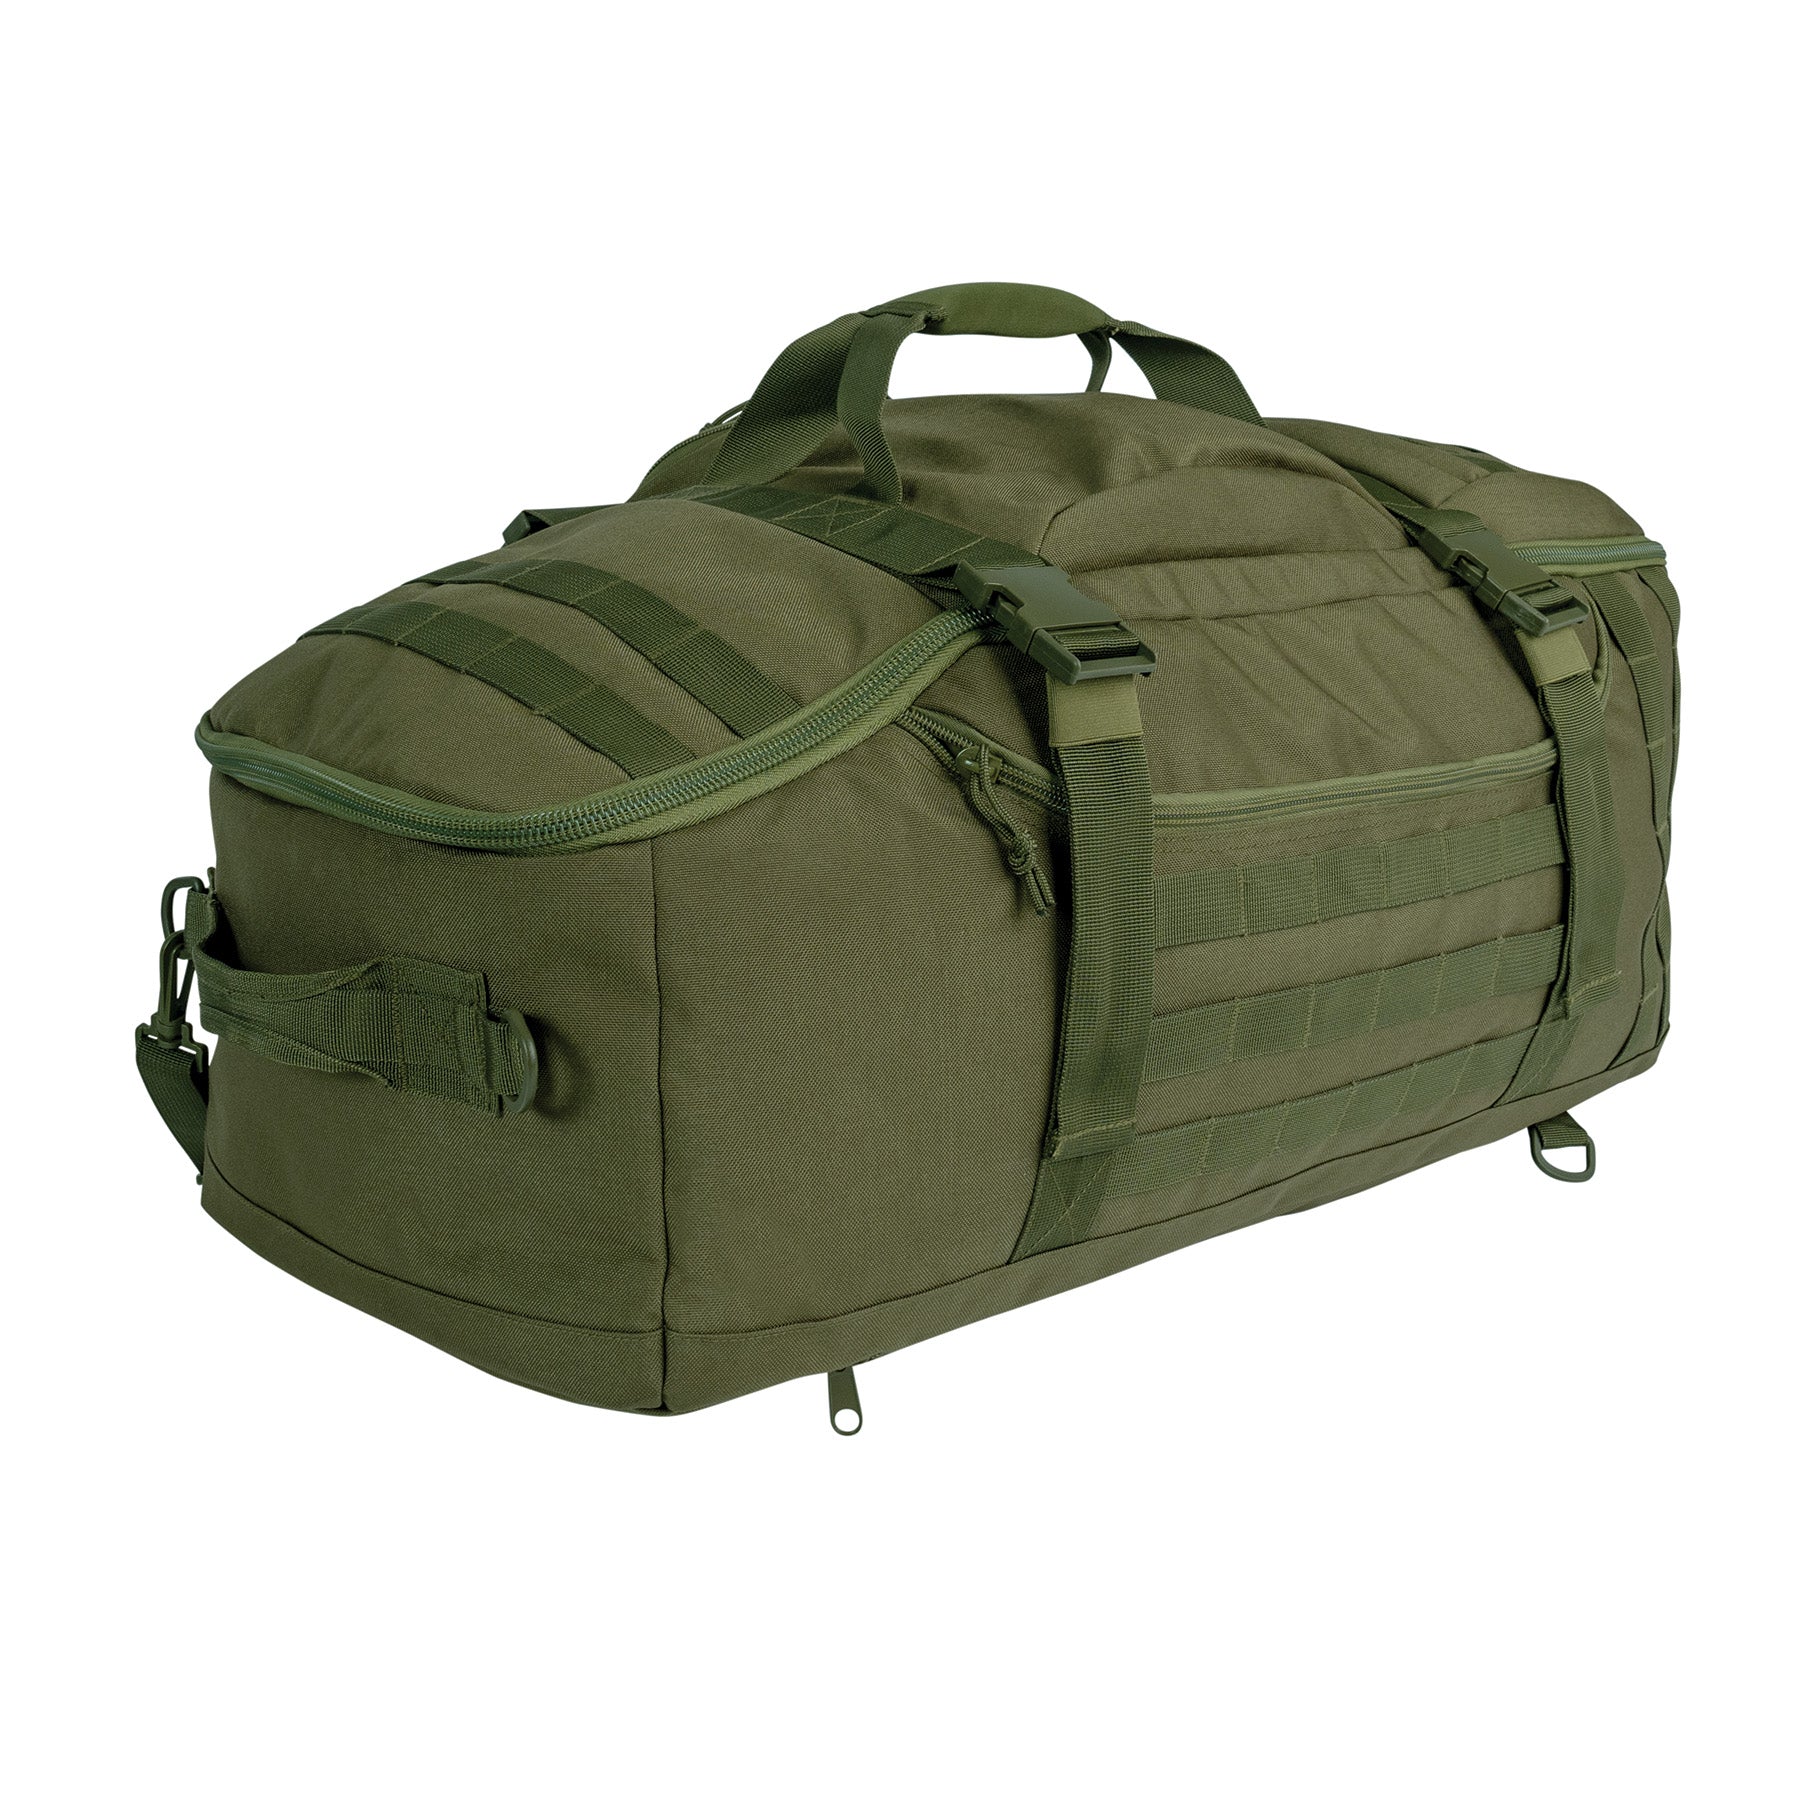 3-In-1 Convertible Mission Bag - Tactical Choice Plus